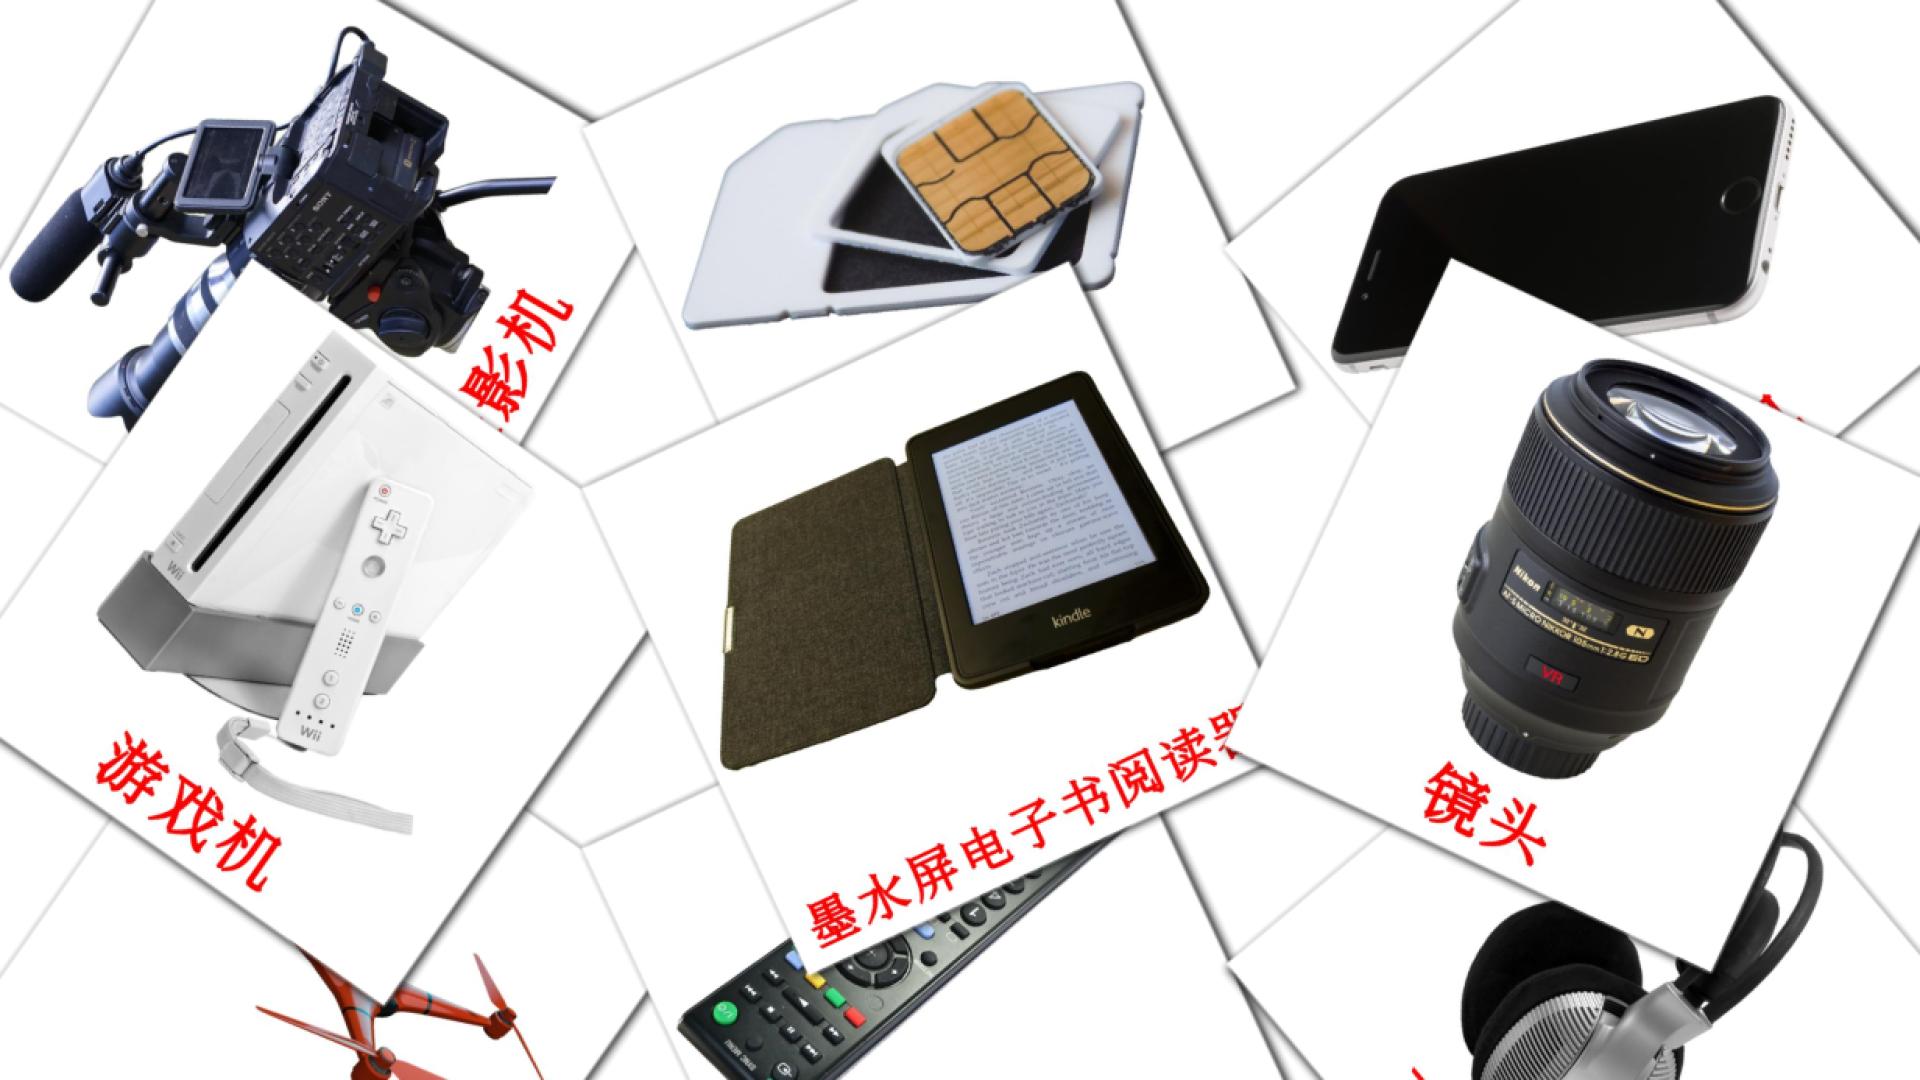 Gadgets - chinese(Simplified) vocabulary cards